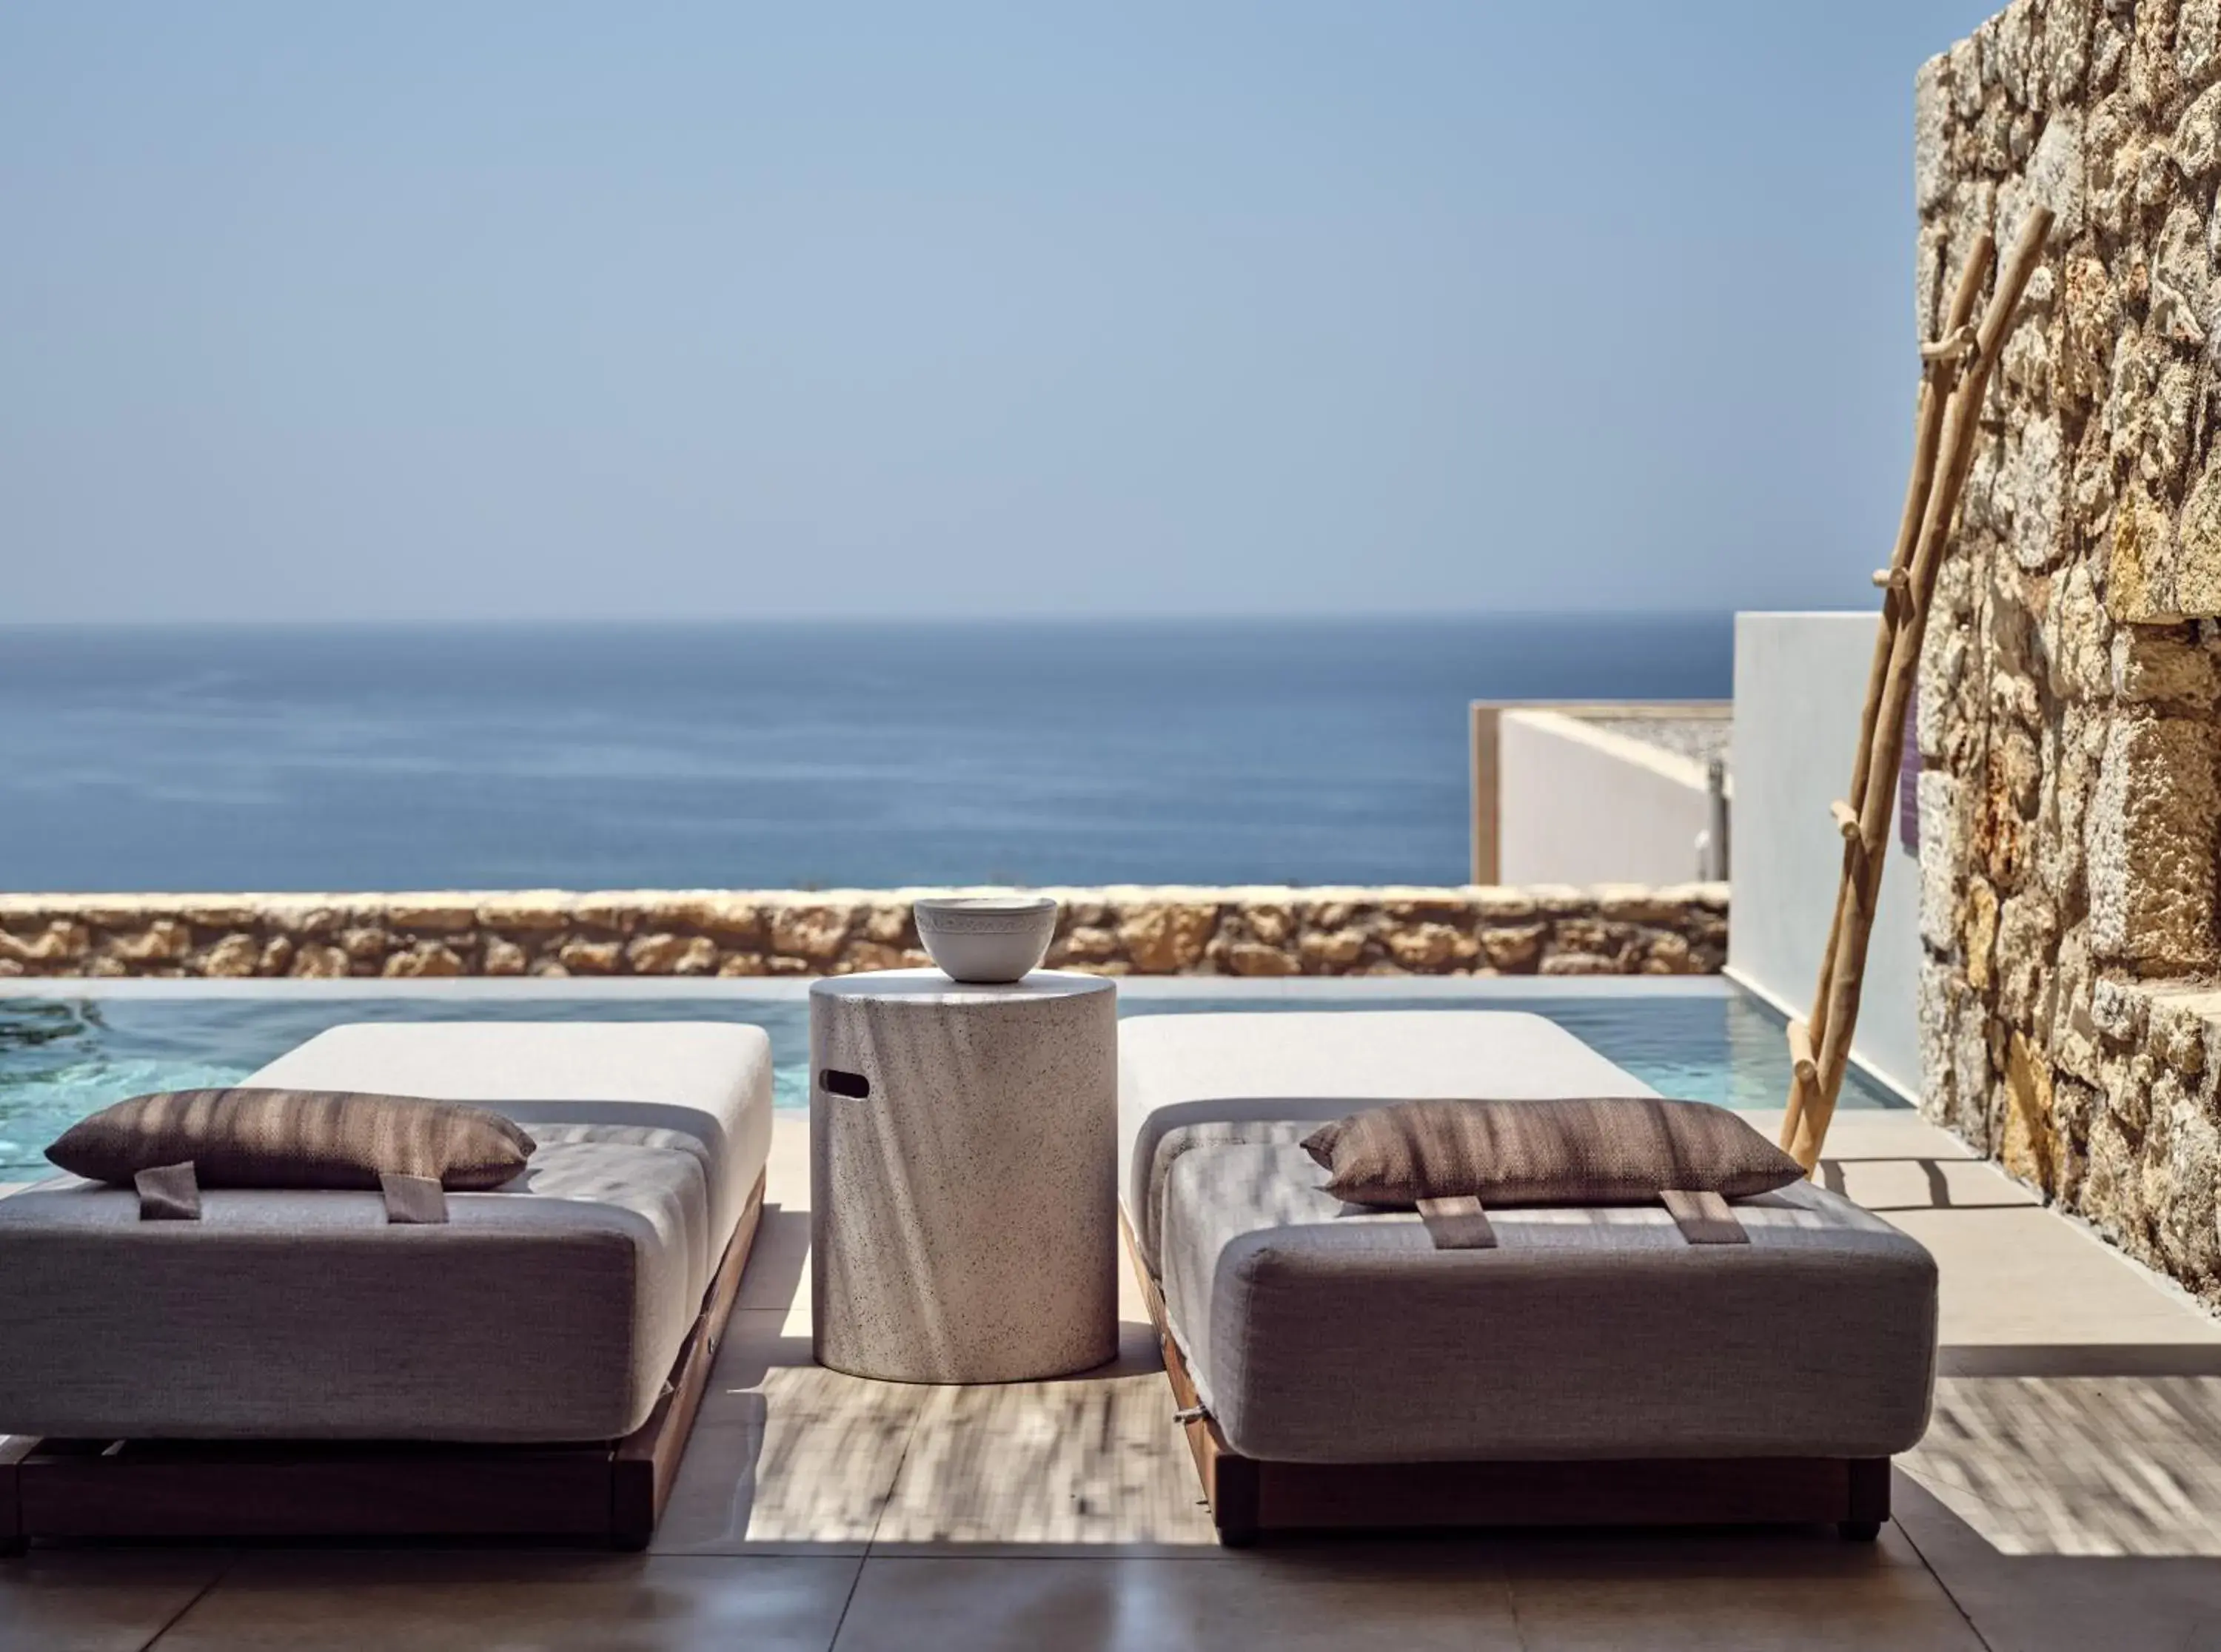 Swimming pool in The Royal Senses Resort Crete, Curio Collection by Hilton